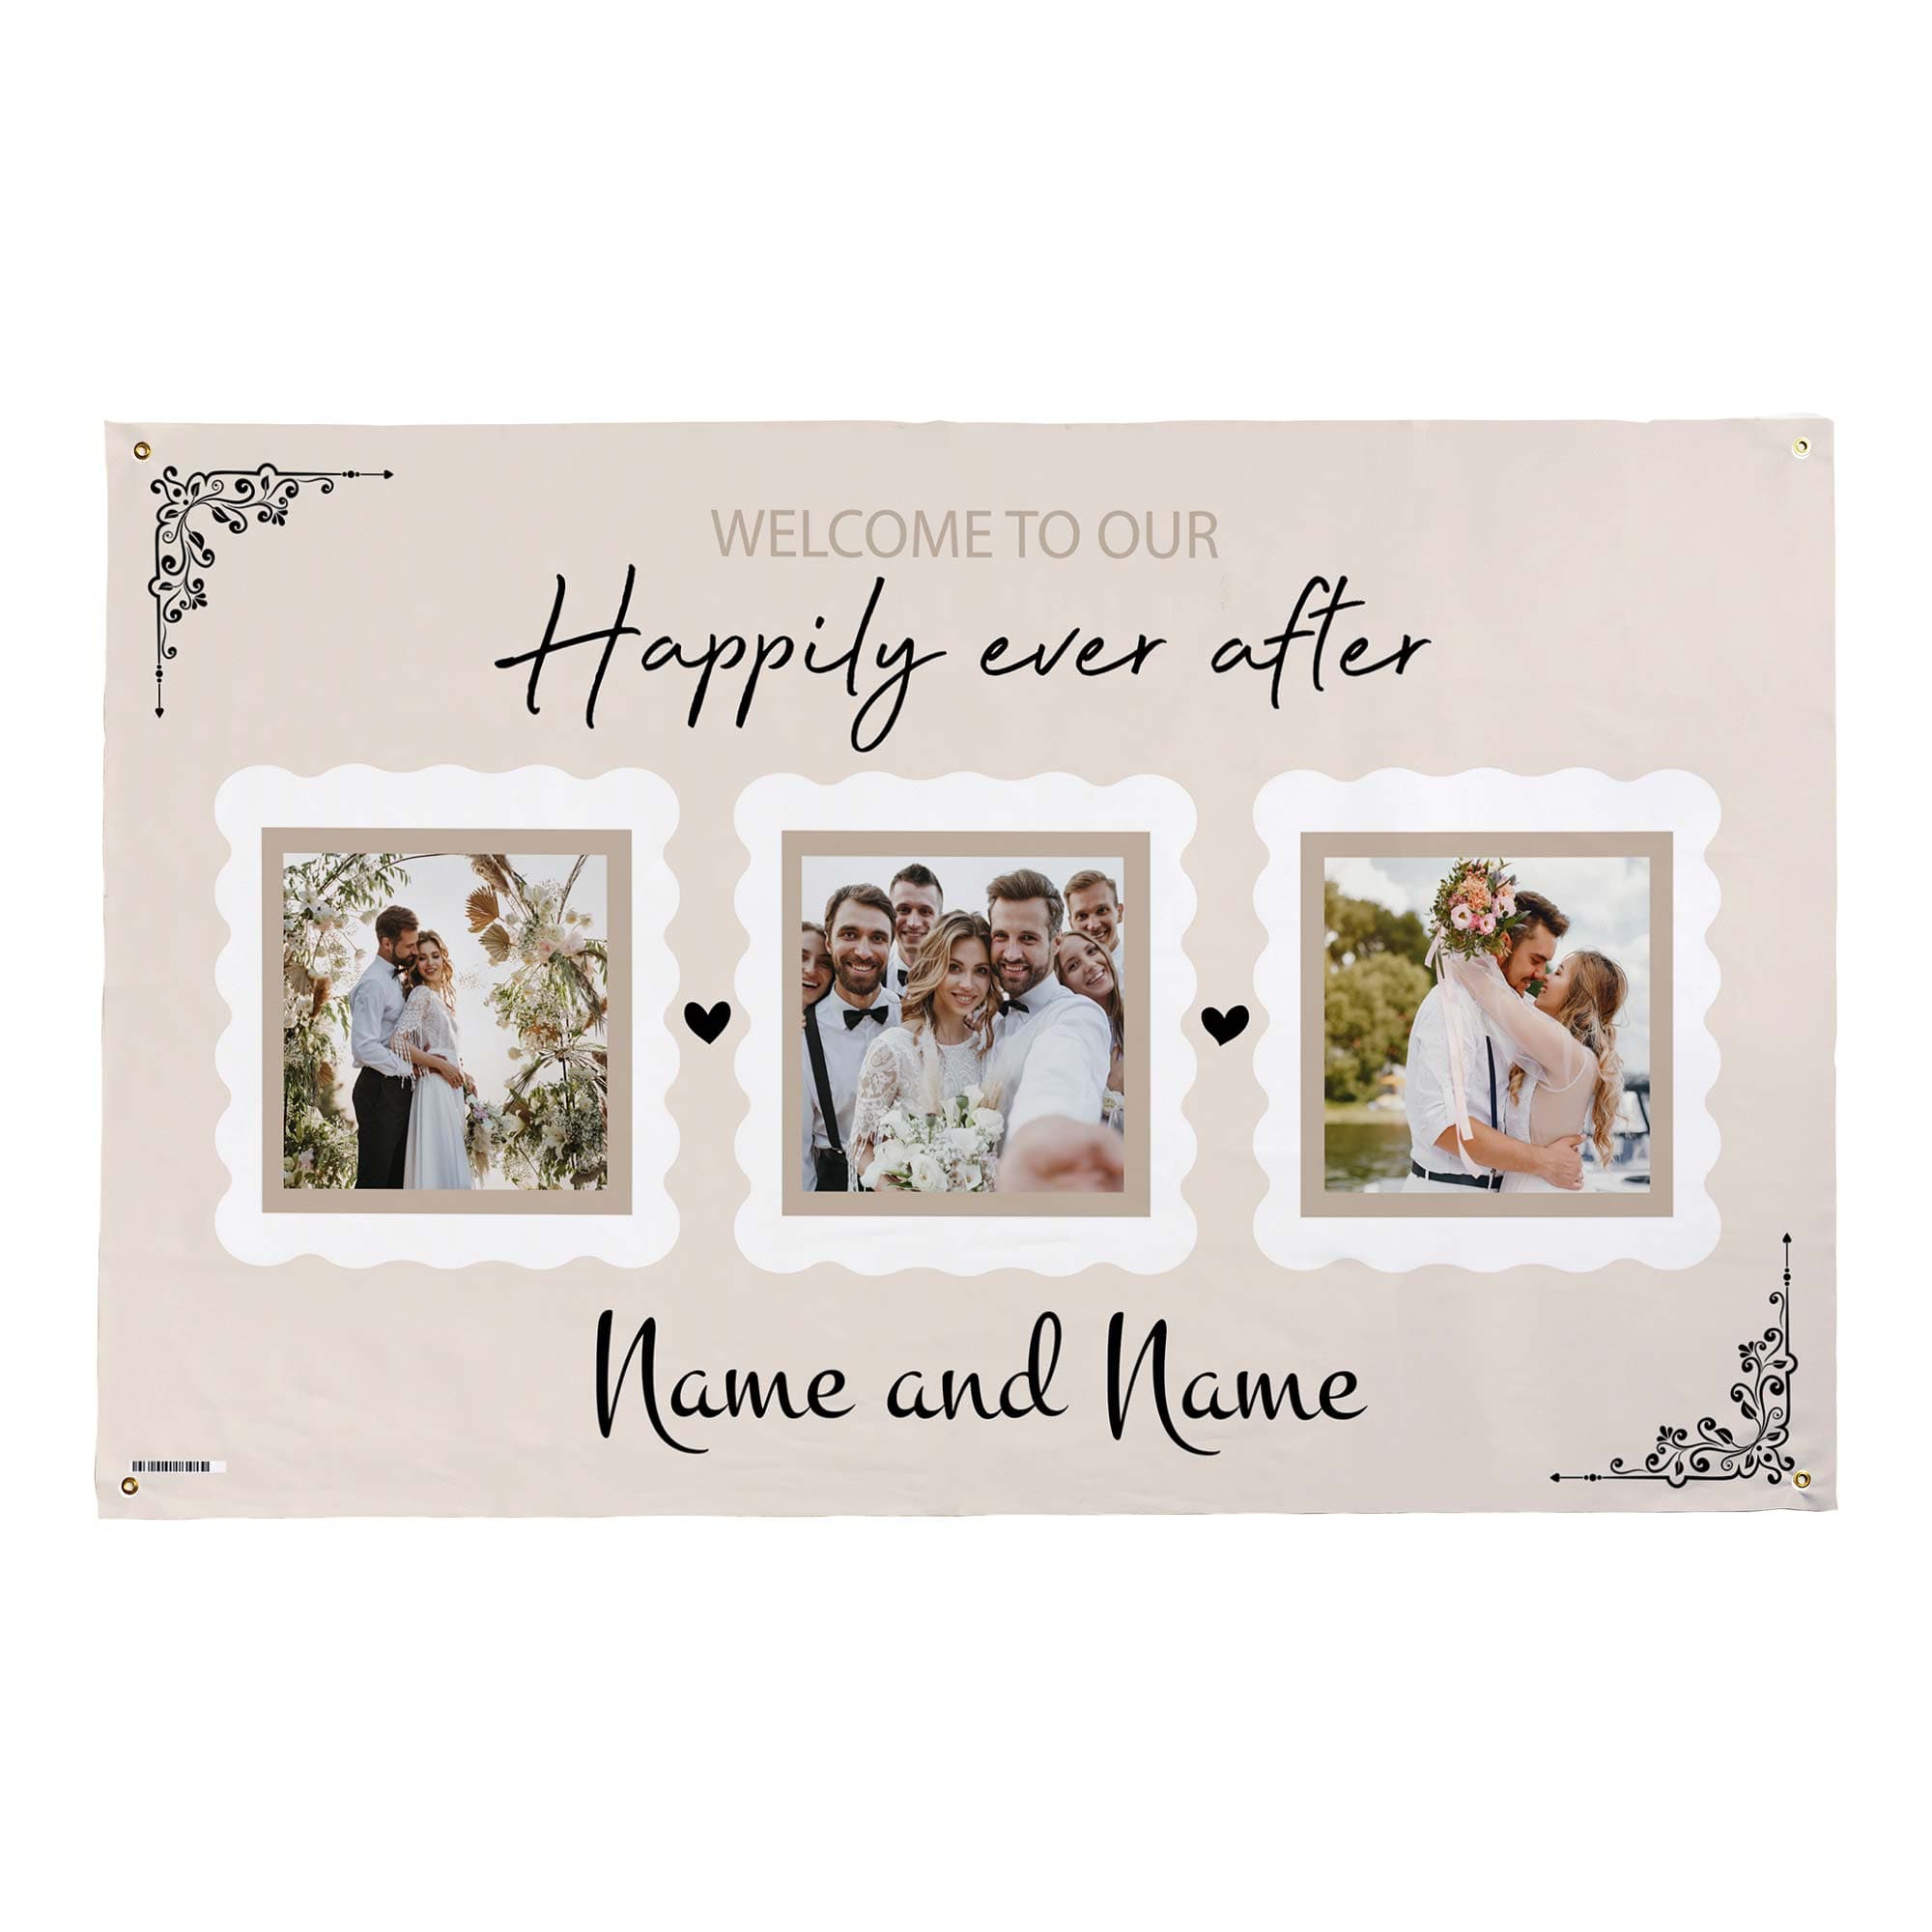 Personalised Fabric Photo Banner 5ft x 3ft - Wedding Happily Ever After